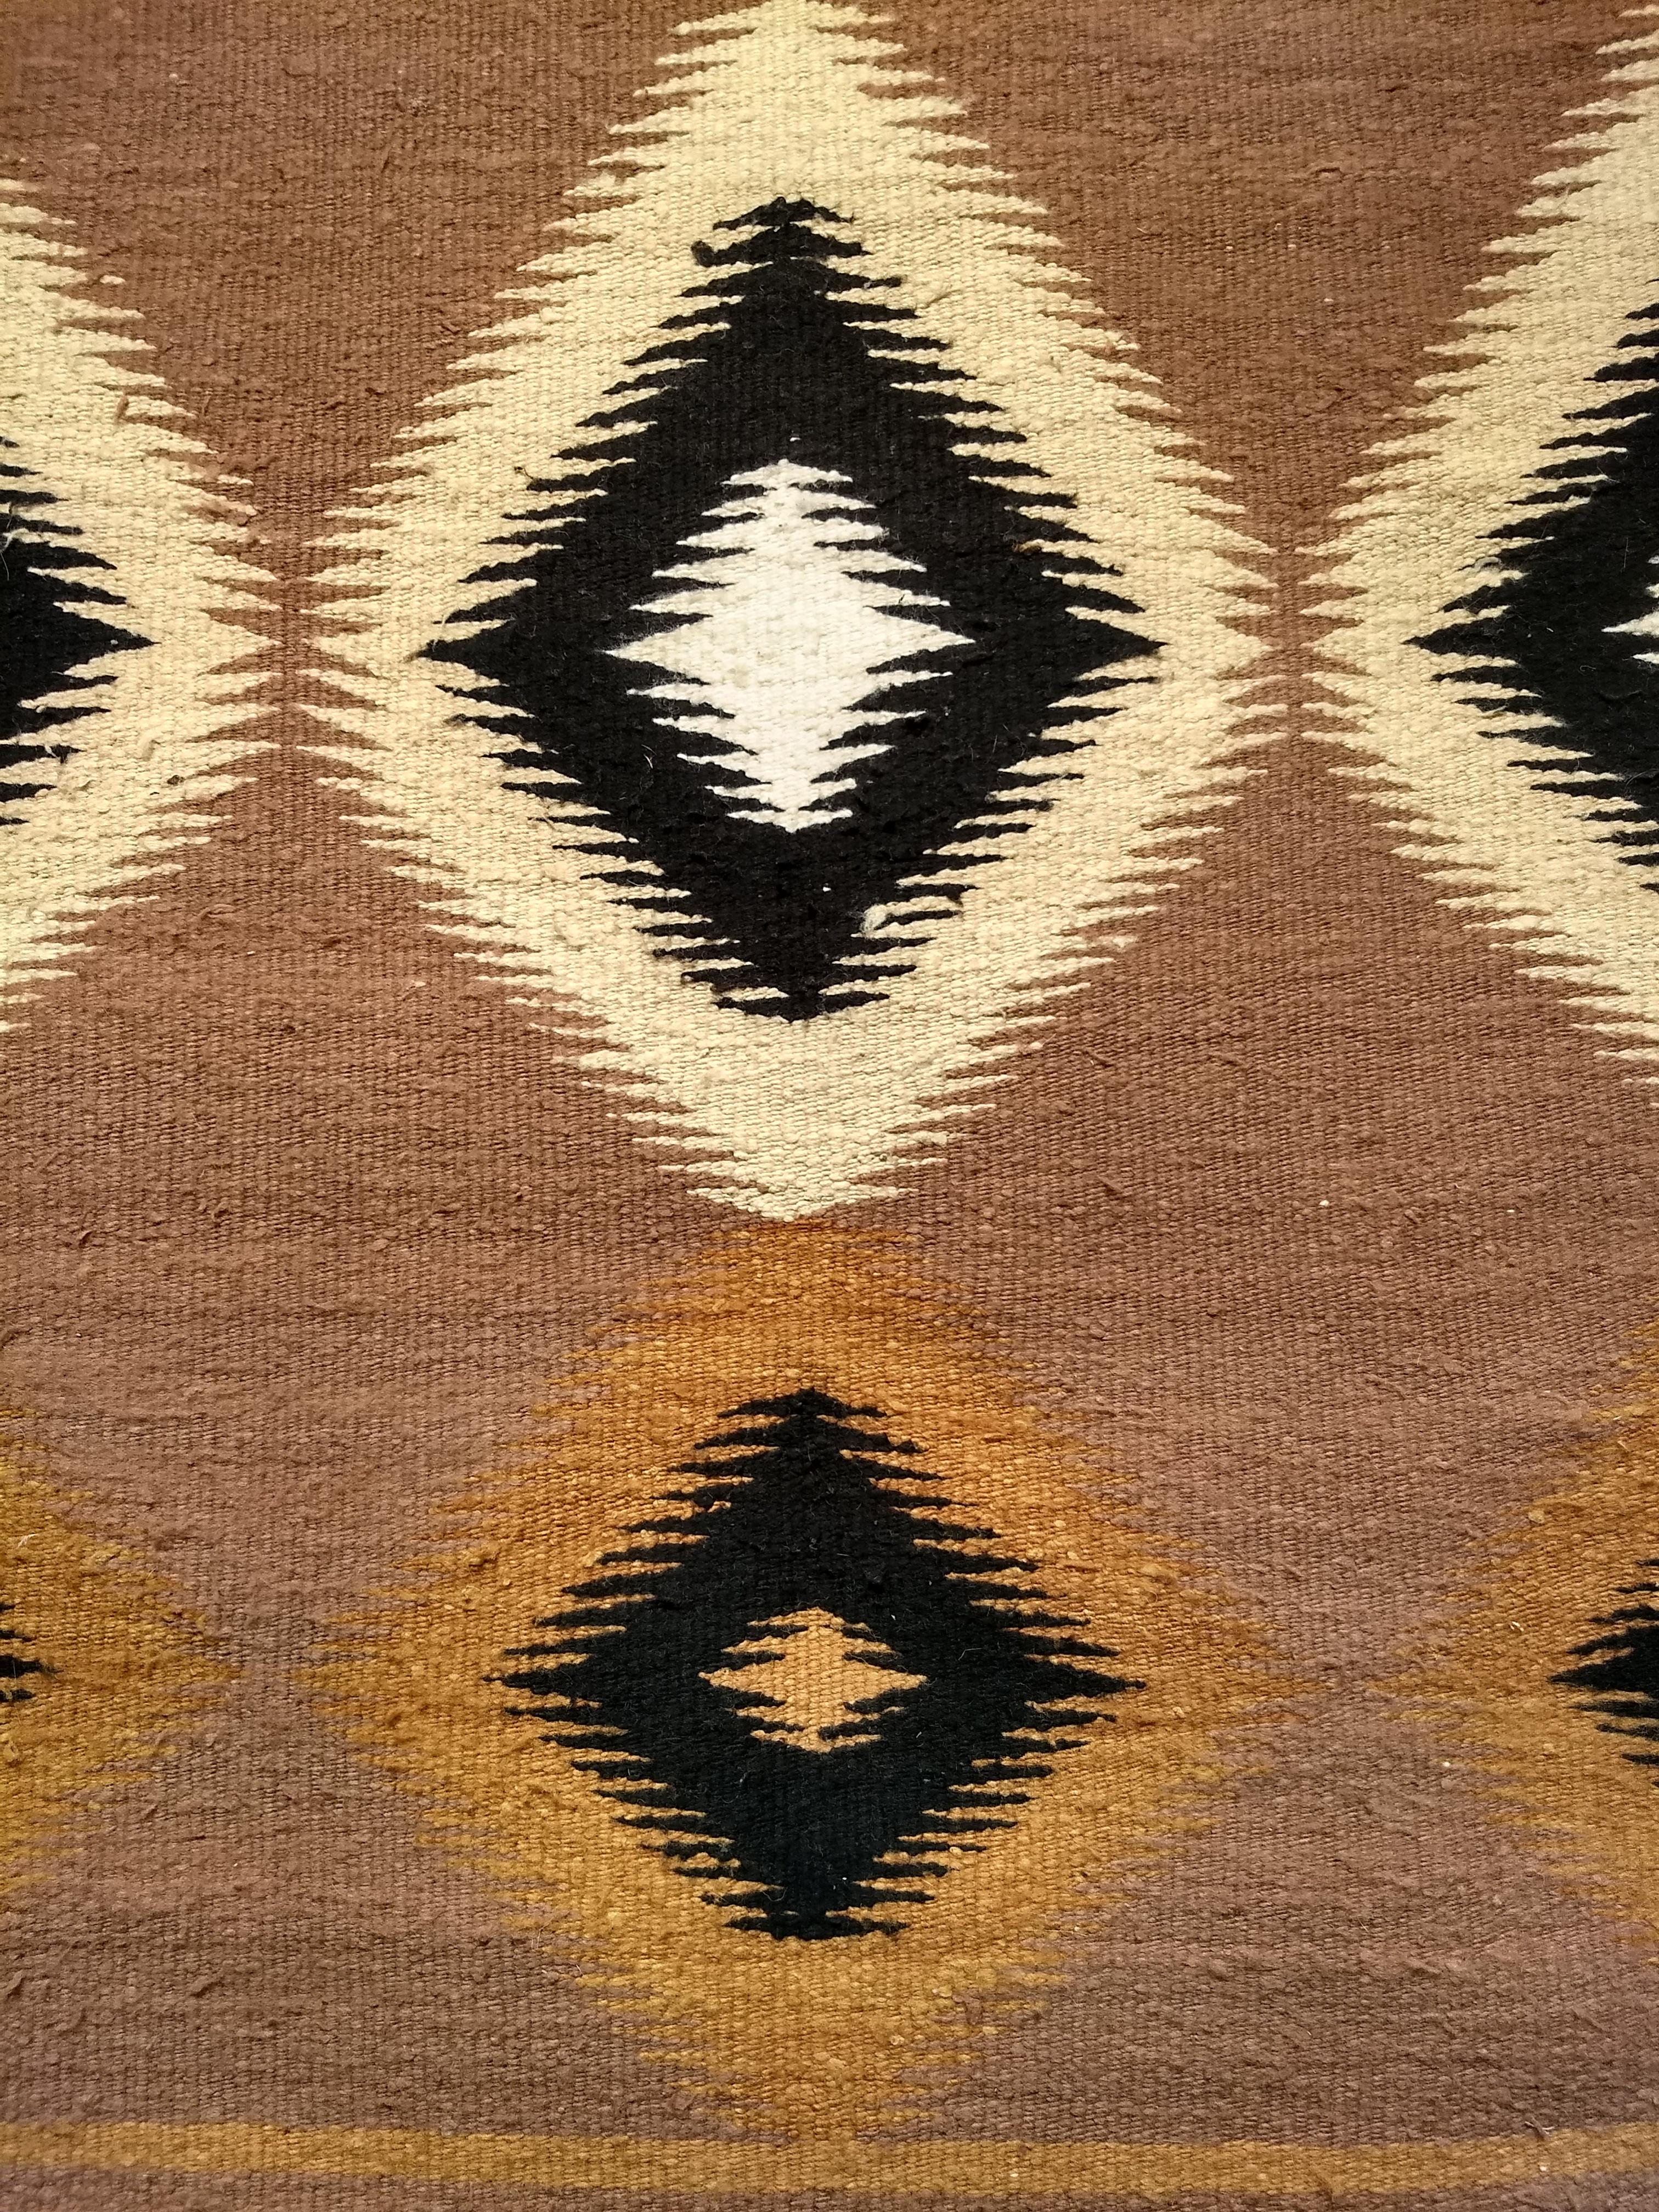  Vintage American Navajo Rug in Eye Dazzler Pattern in Ivory, Brown, Black In Good Condition For Sale In Barrington, IL